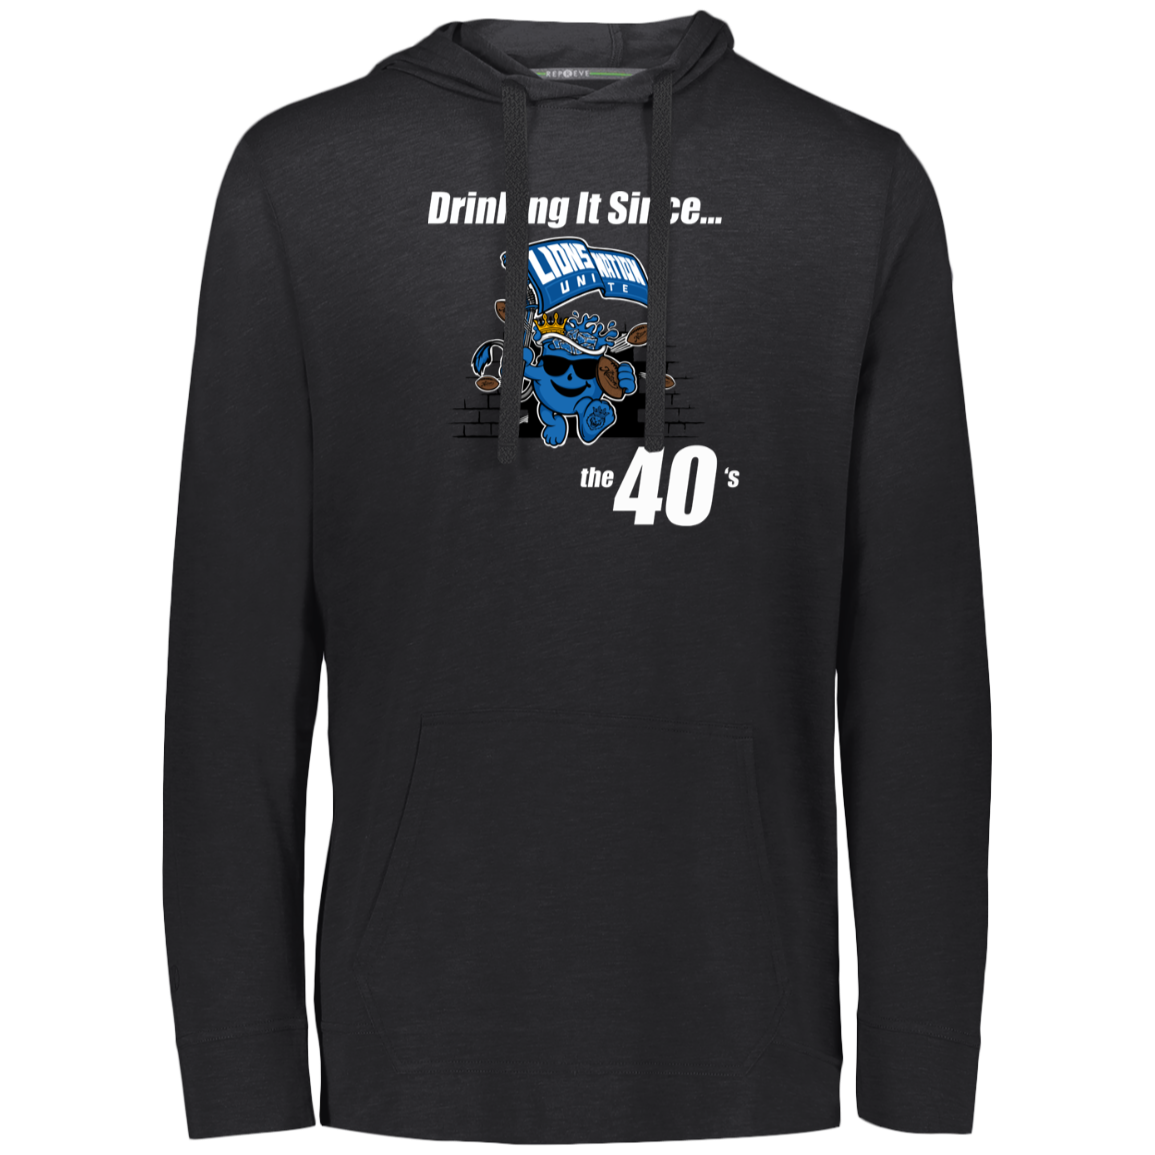 Drinking It Since the 40's Men's T-Shirt Hoodie